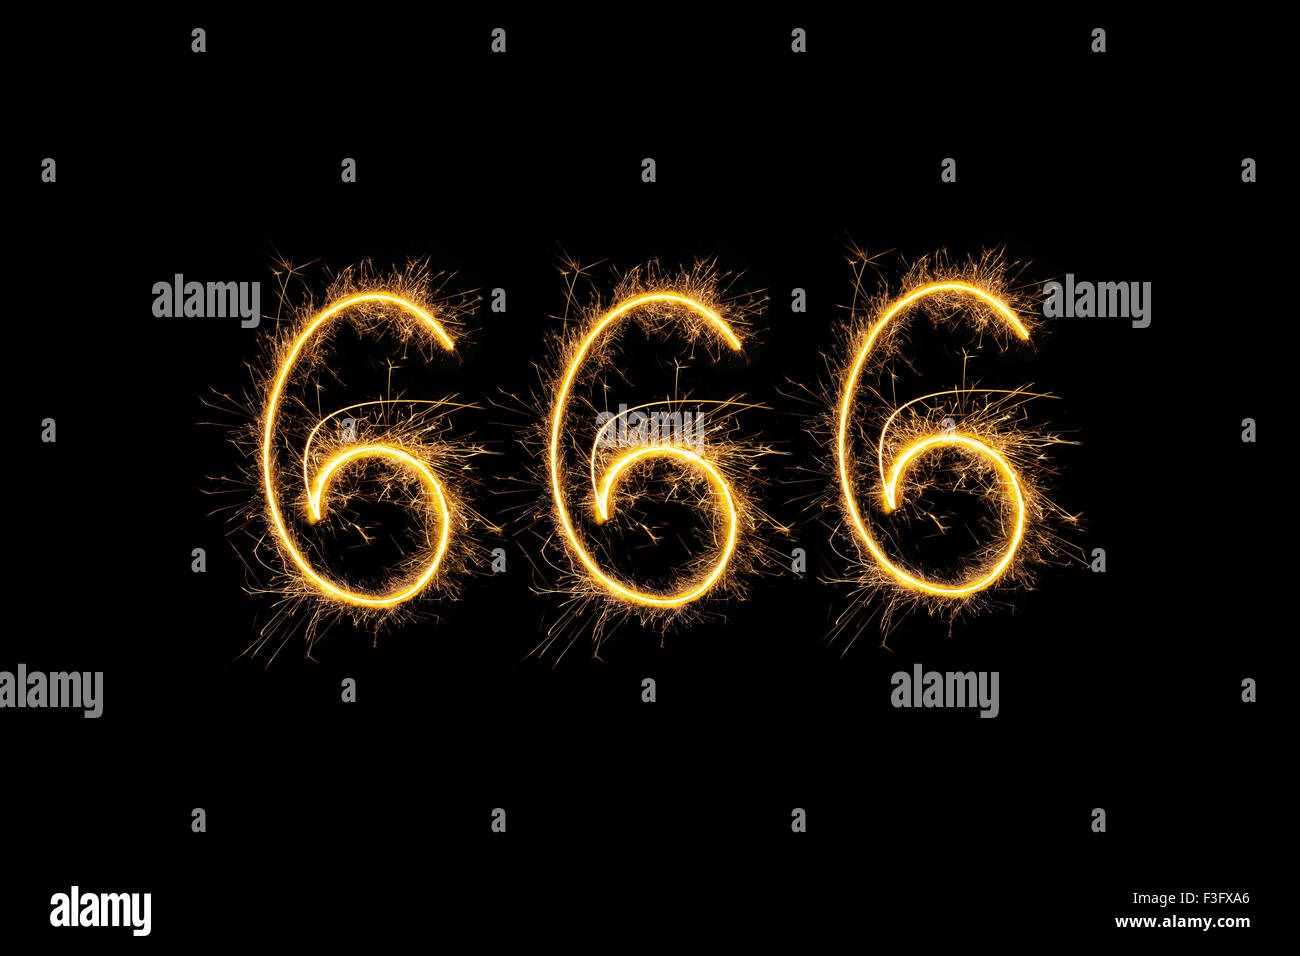 Sparkling digits 666 isolated on black background. Hell, death and satan symbol. Stock Photo